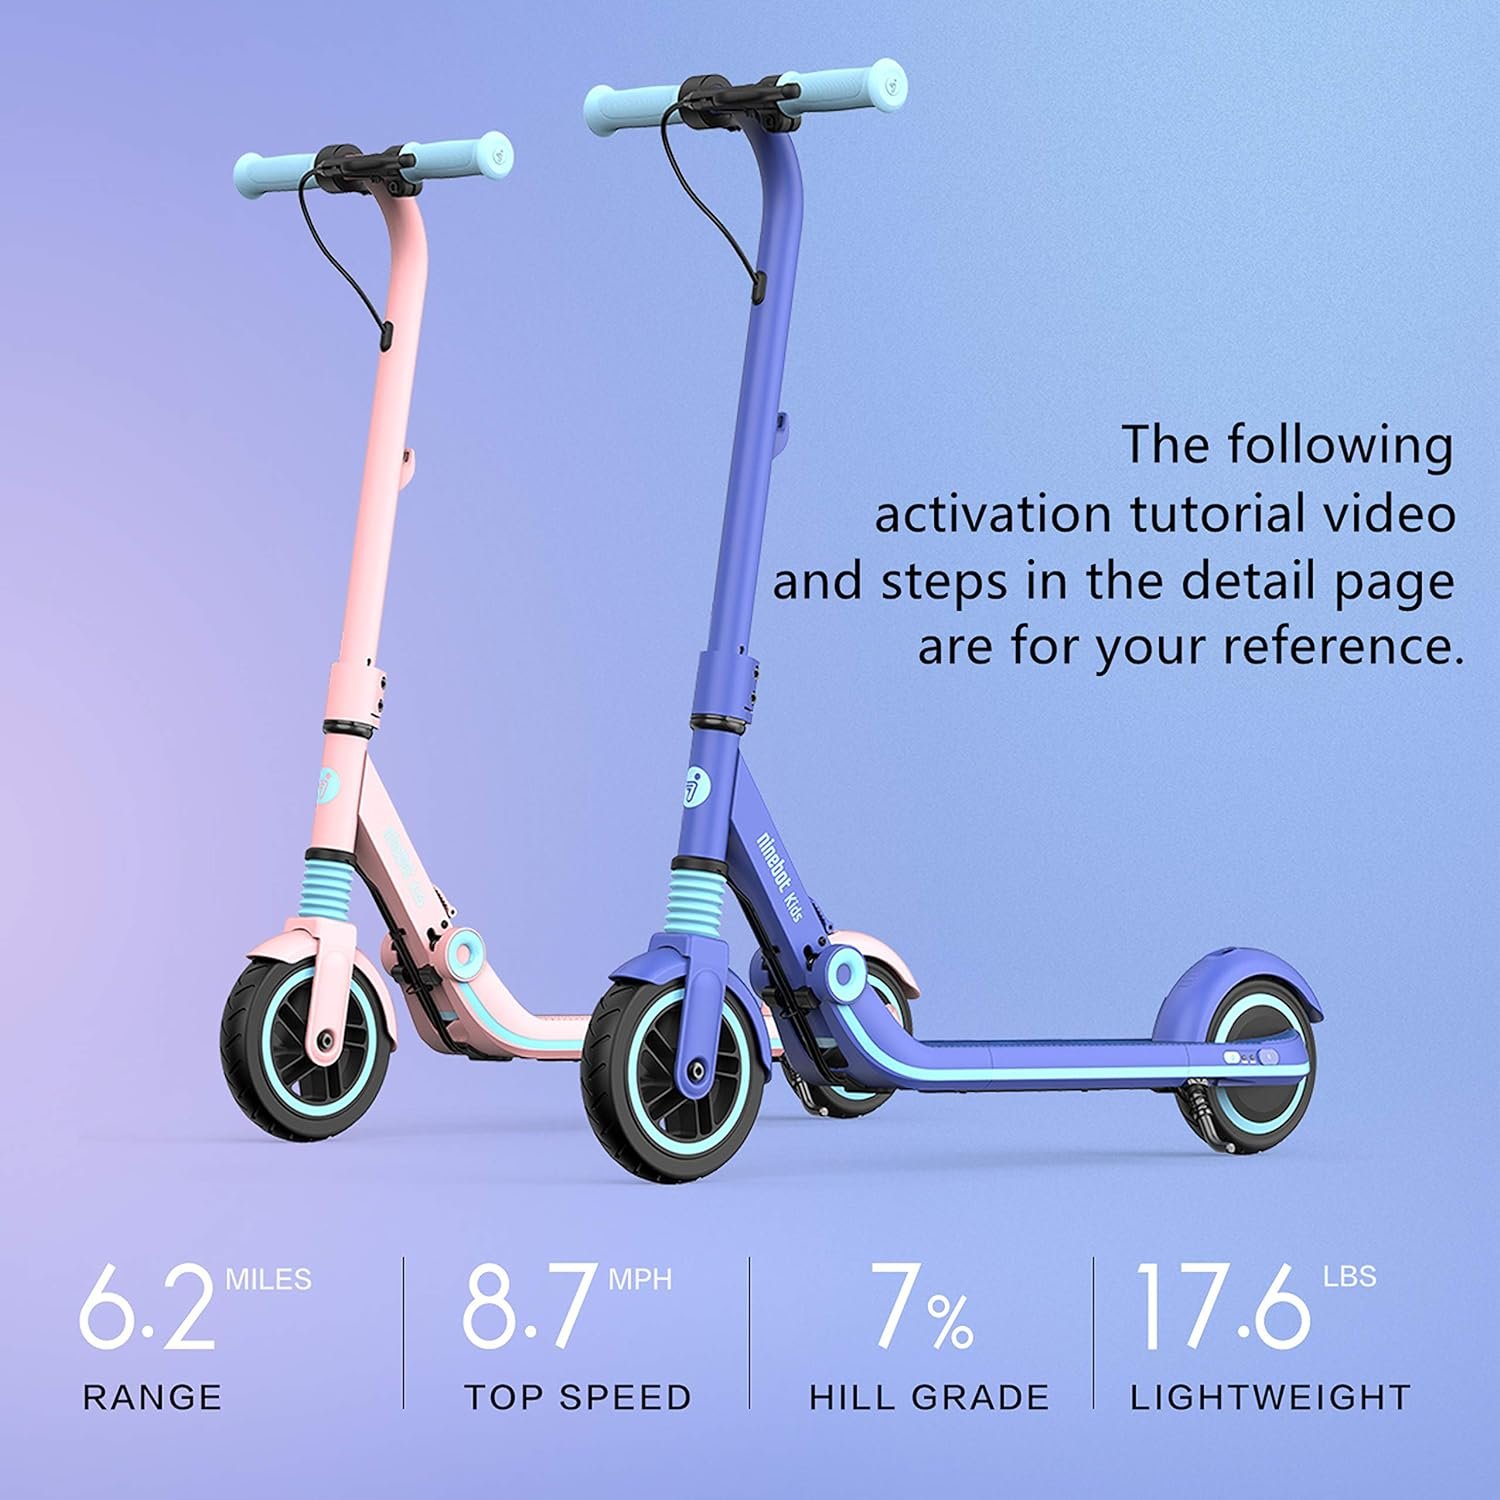 Segway Ninebot eKickScooter - Electric Kick Scooter for Kids Ages 6-14, Up to 11.2 MPH  6.2 Miles Range - Equipped with 130W/150W/180W Motor, Includes New Cruise Mode, Suitable for Boys and Girls